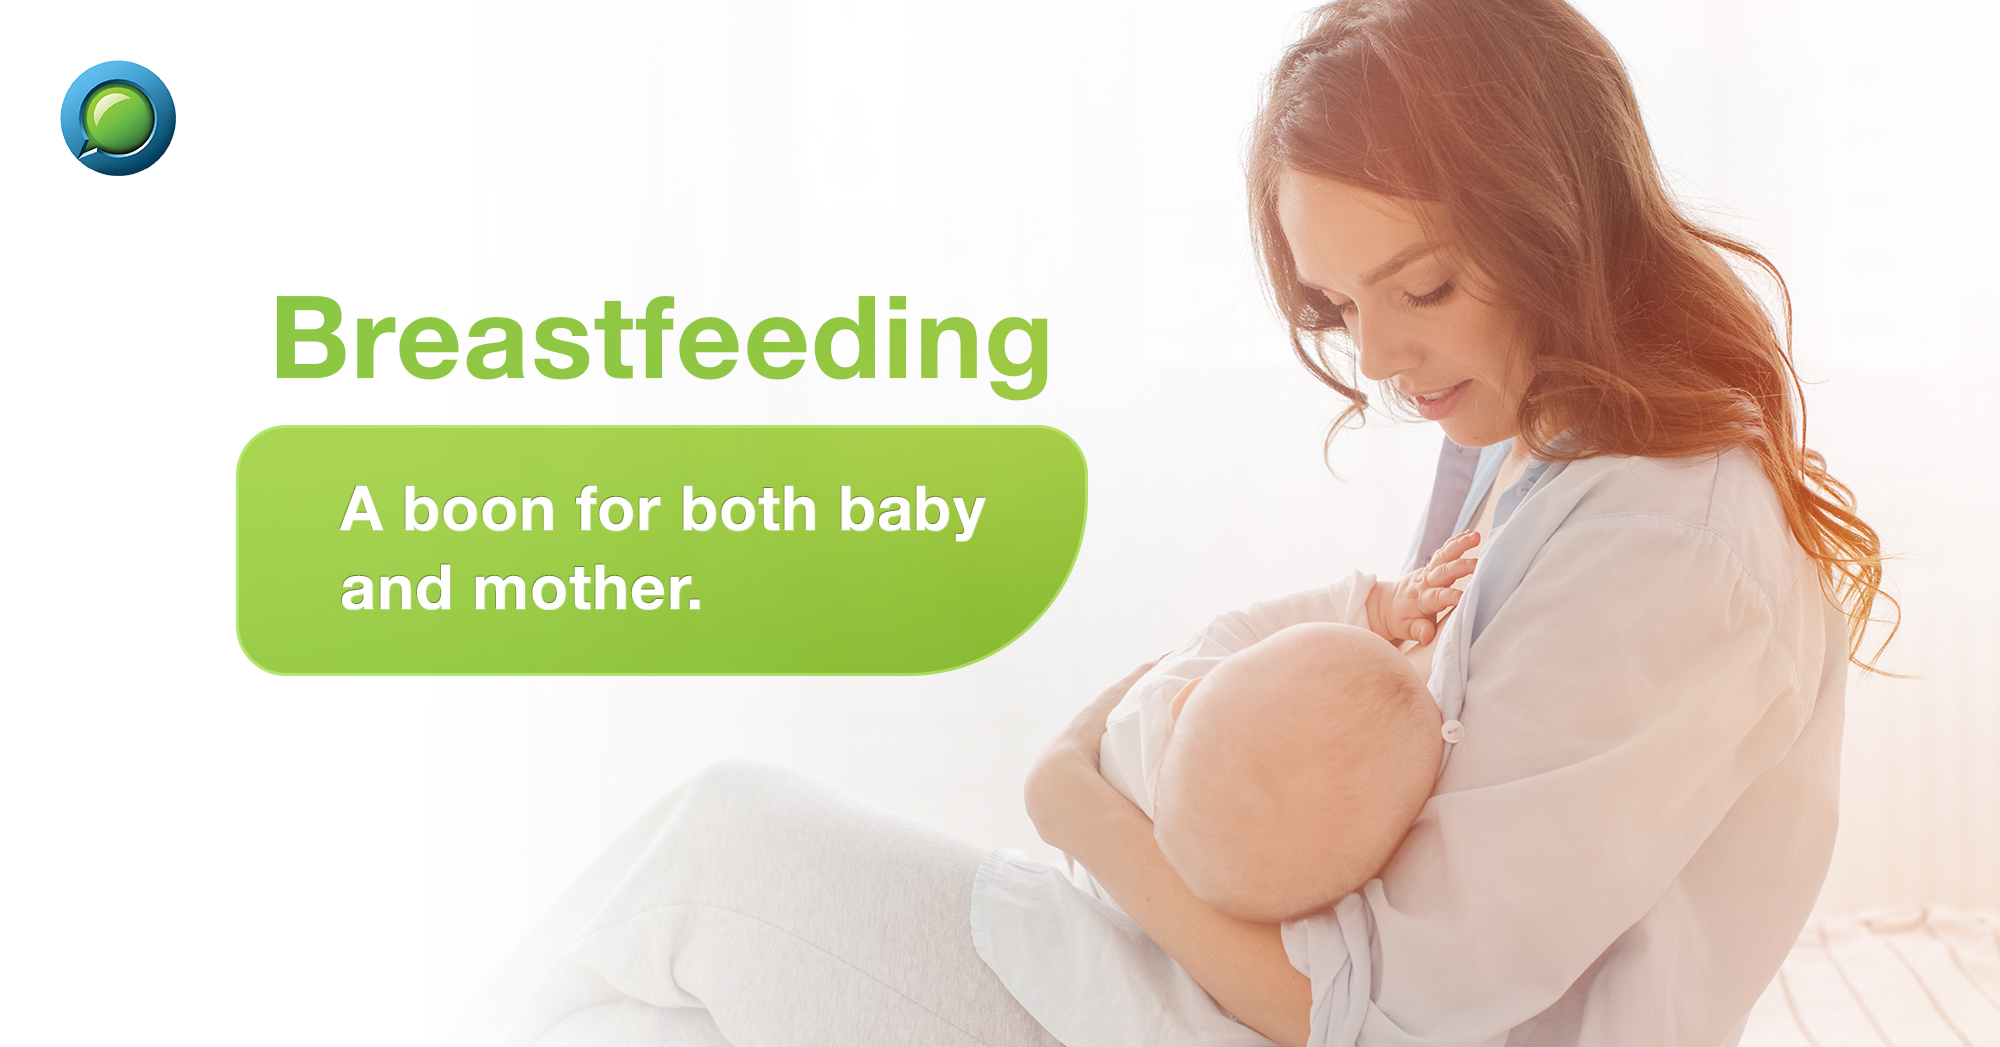 Breastfeeding - A boon for both baby and mother